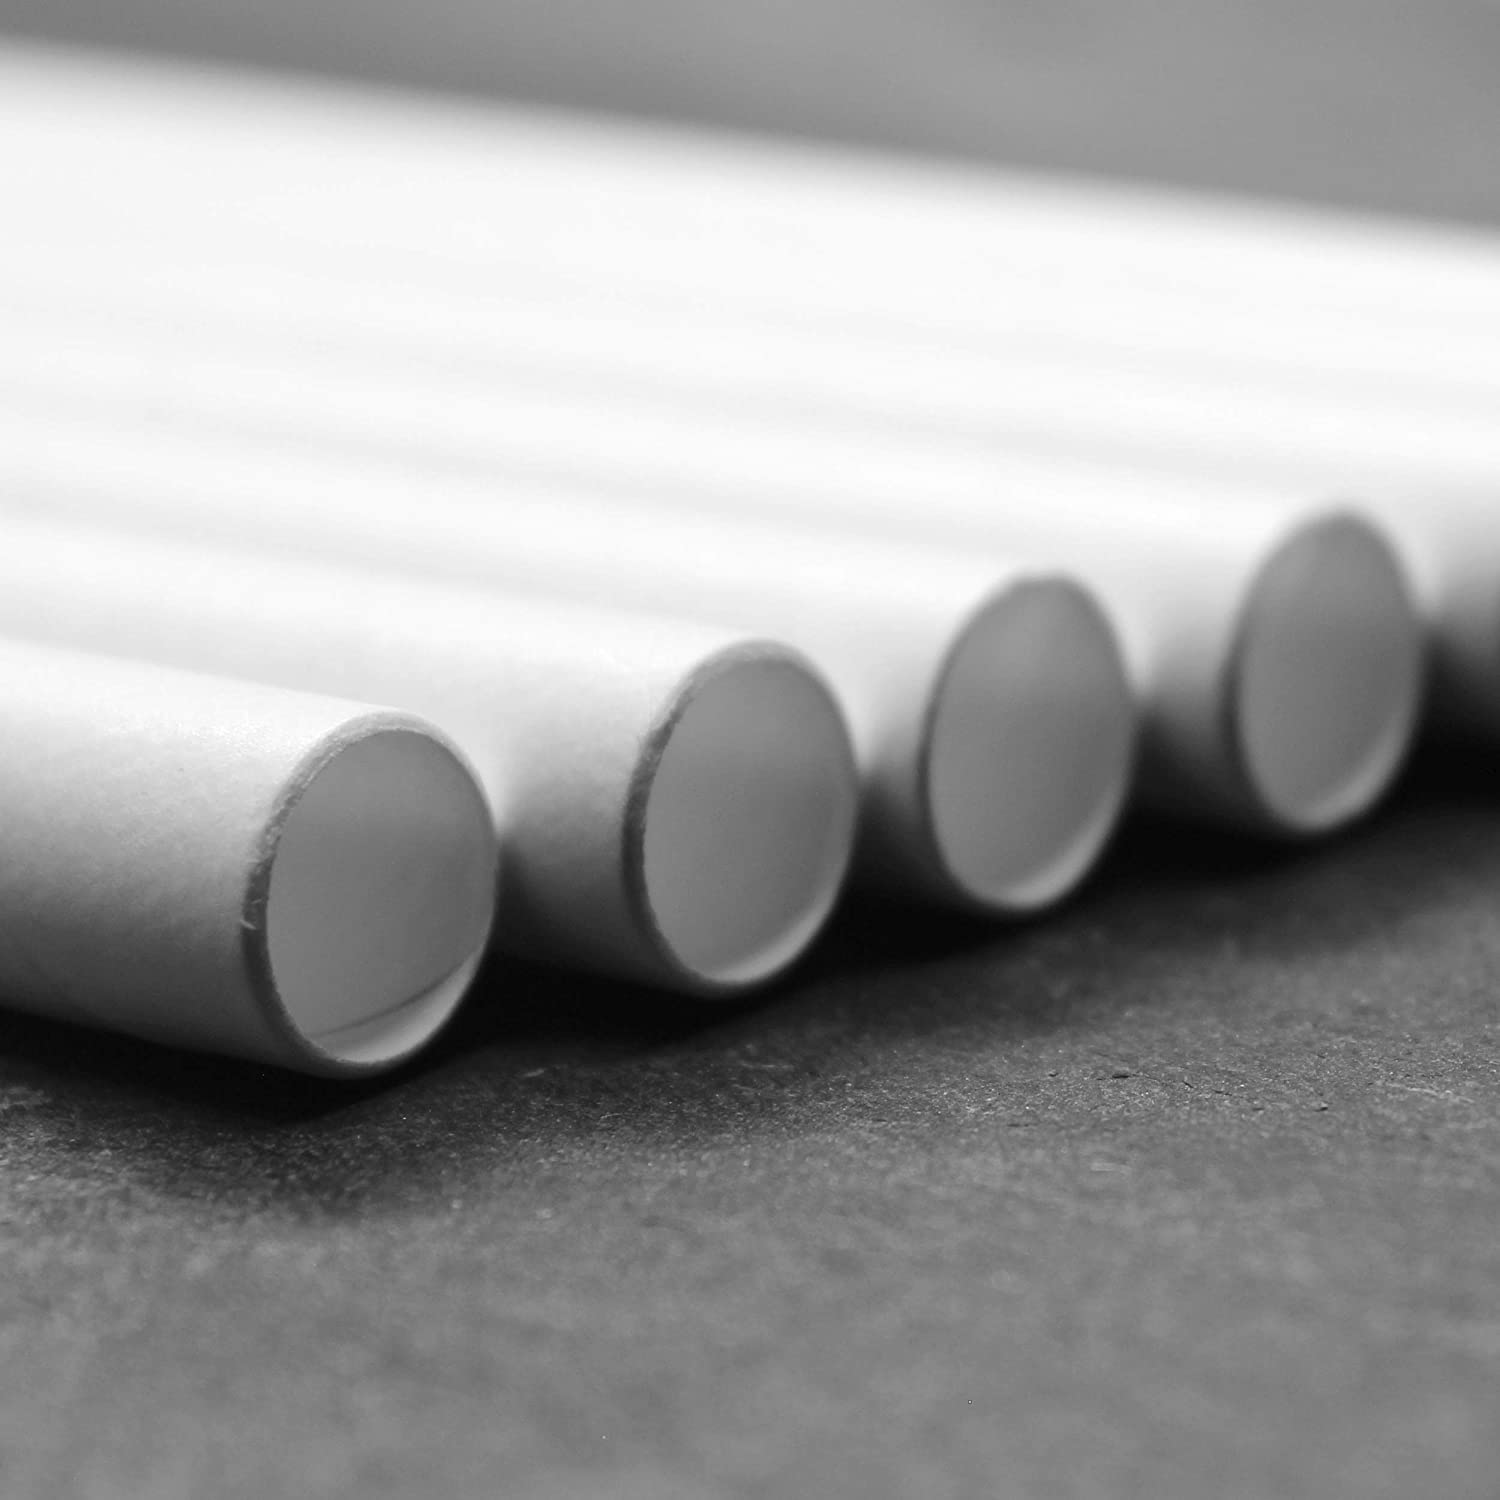 White Solid Paper Eco Straws - Smoothie Wider 8mm/200mm - 350 straws pack